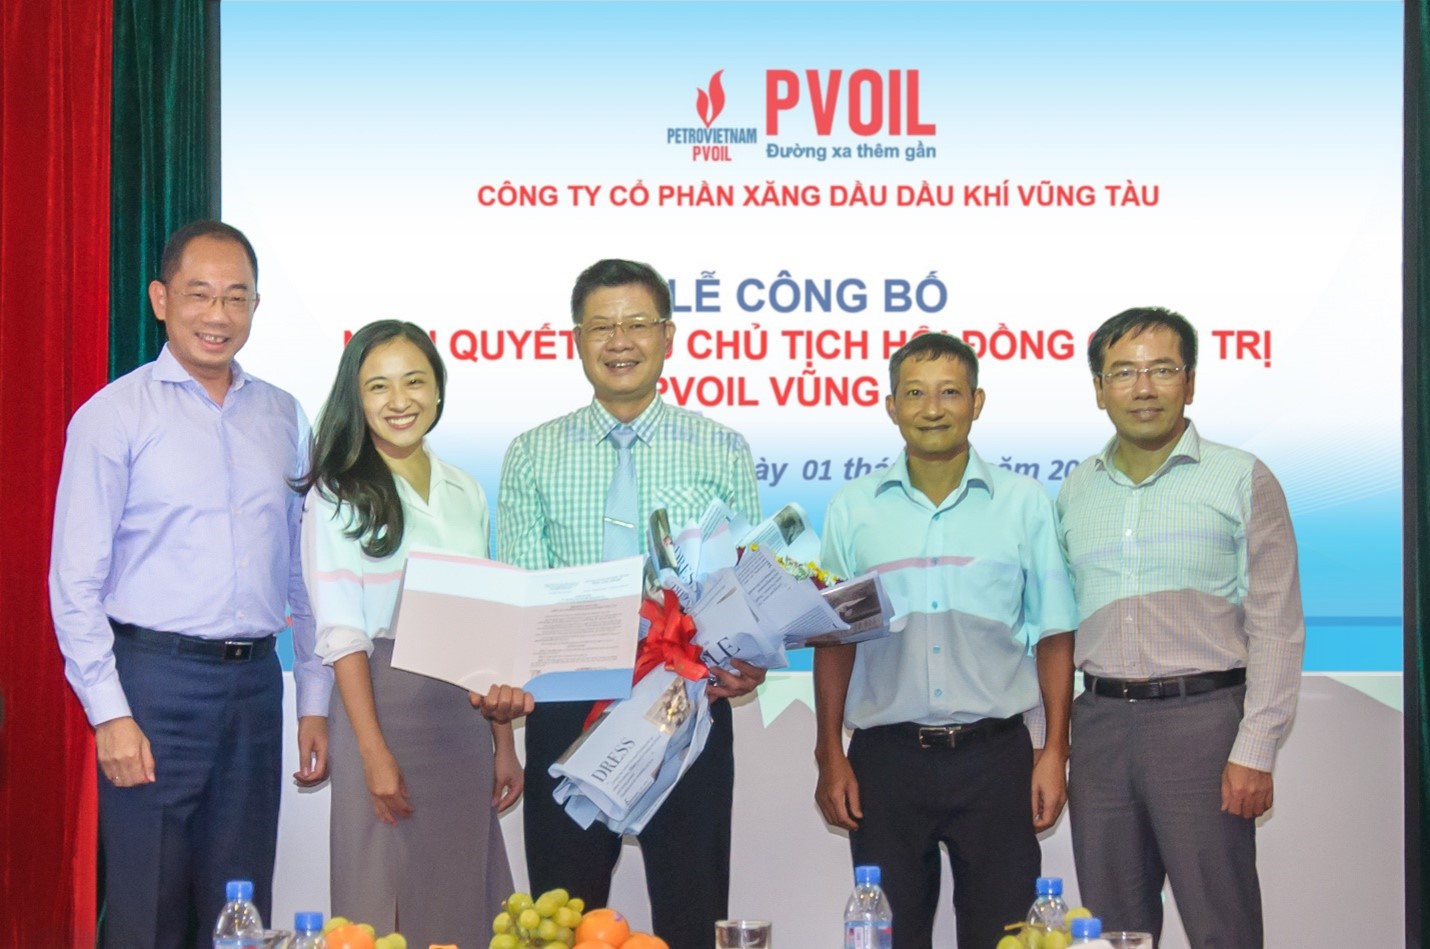 PVOIL Vung Tau has a new chairman of the BOM